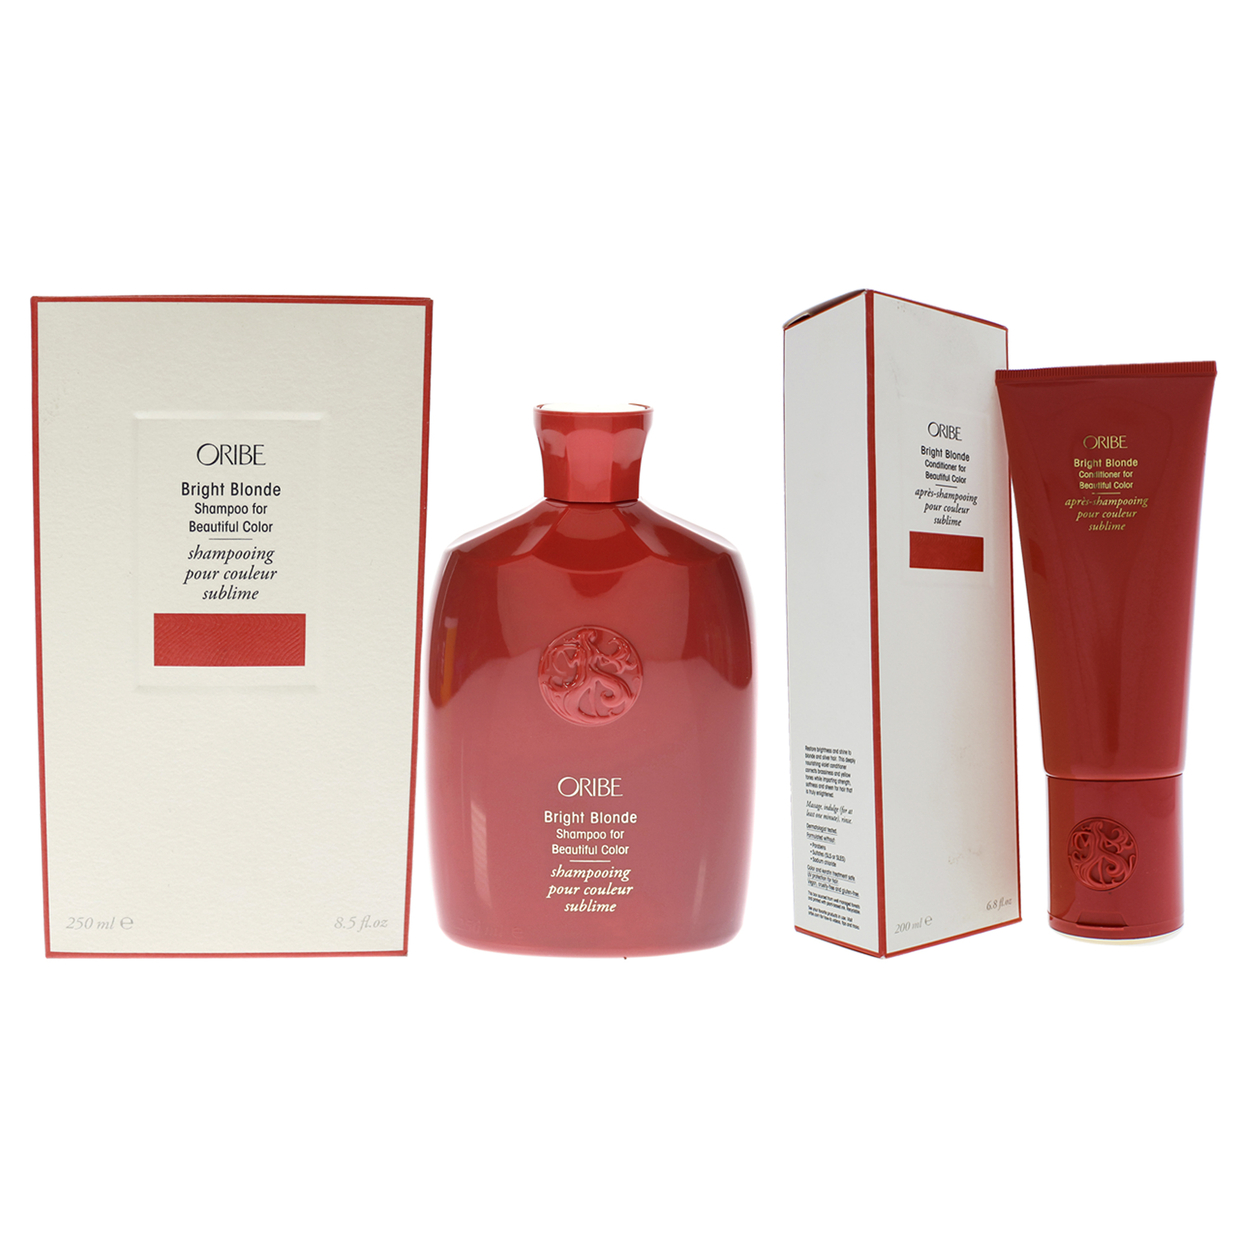 Oribe Bright Blonde Shampoo And Conditioner For Beautiful Color Kit 8.5oz Shampoo, 6.8oz Conditioner 2 Pc Kit